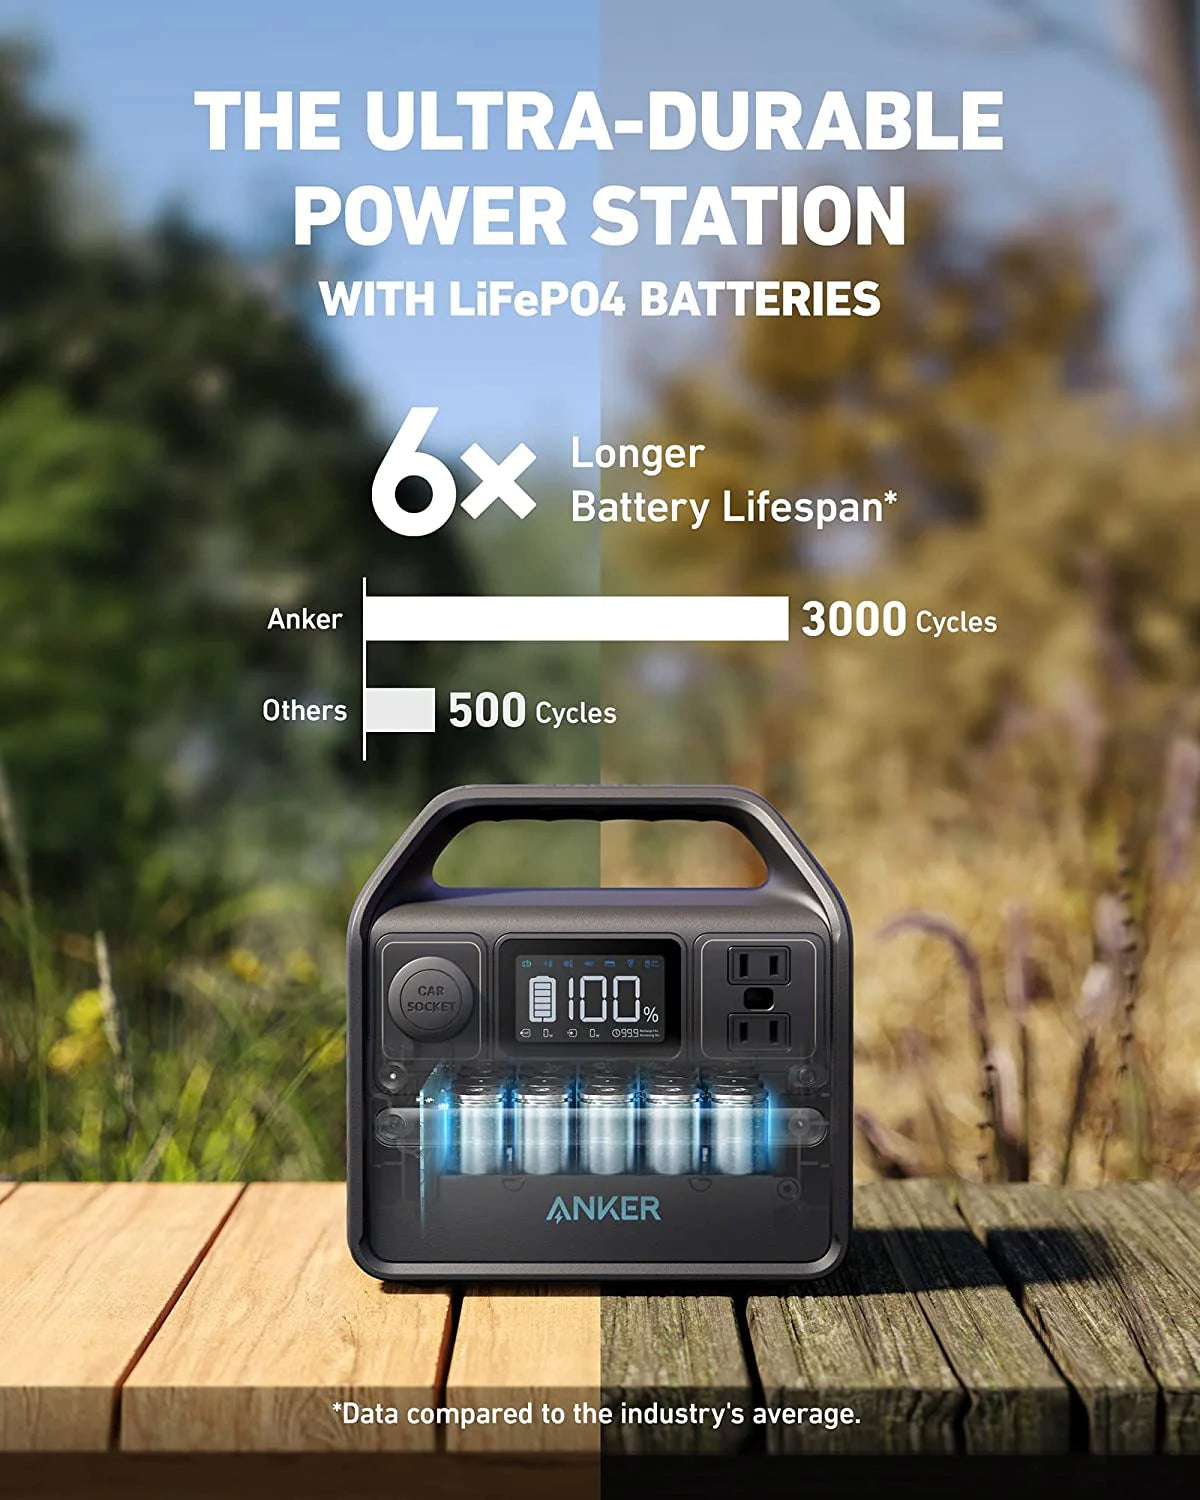 Solar & Battery Powered - Anker 522 Portable Power Station With Anker 625 Solar Panel 100W